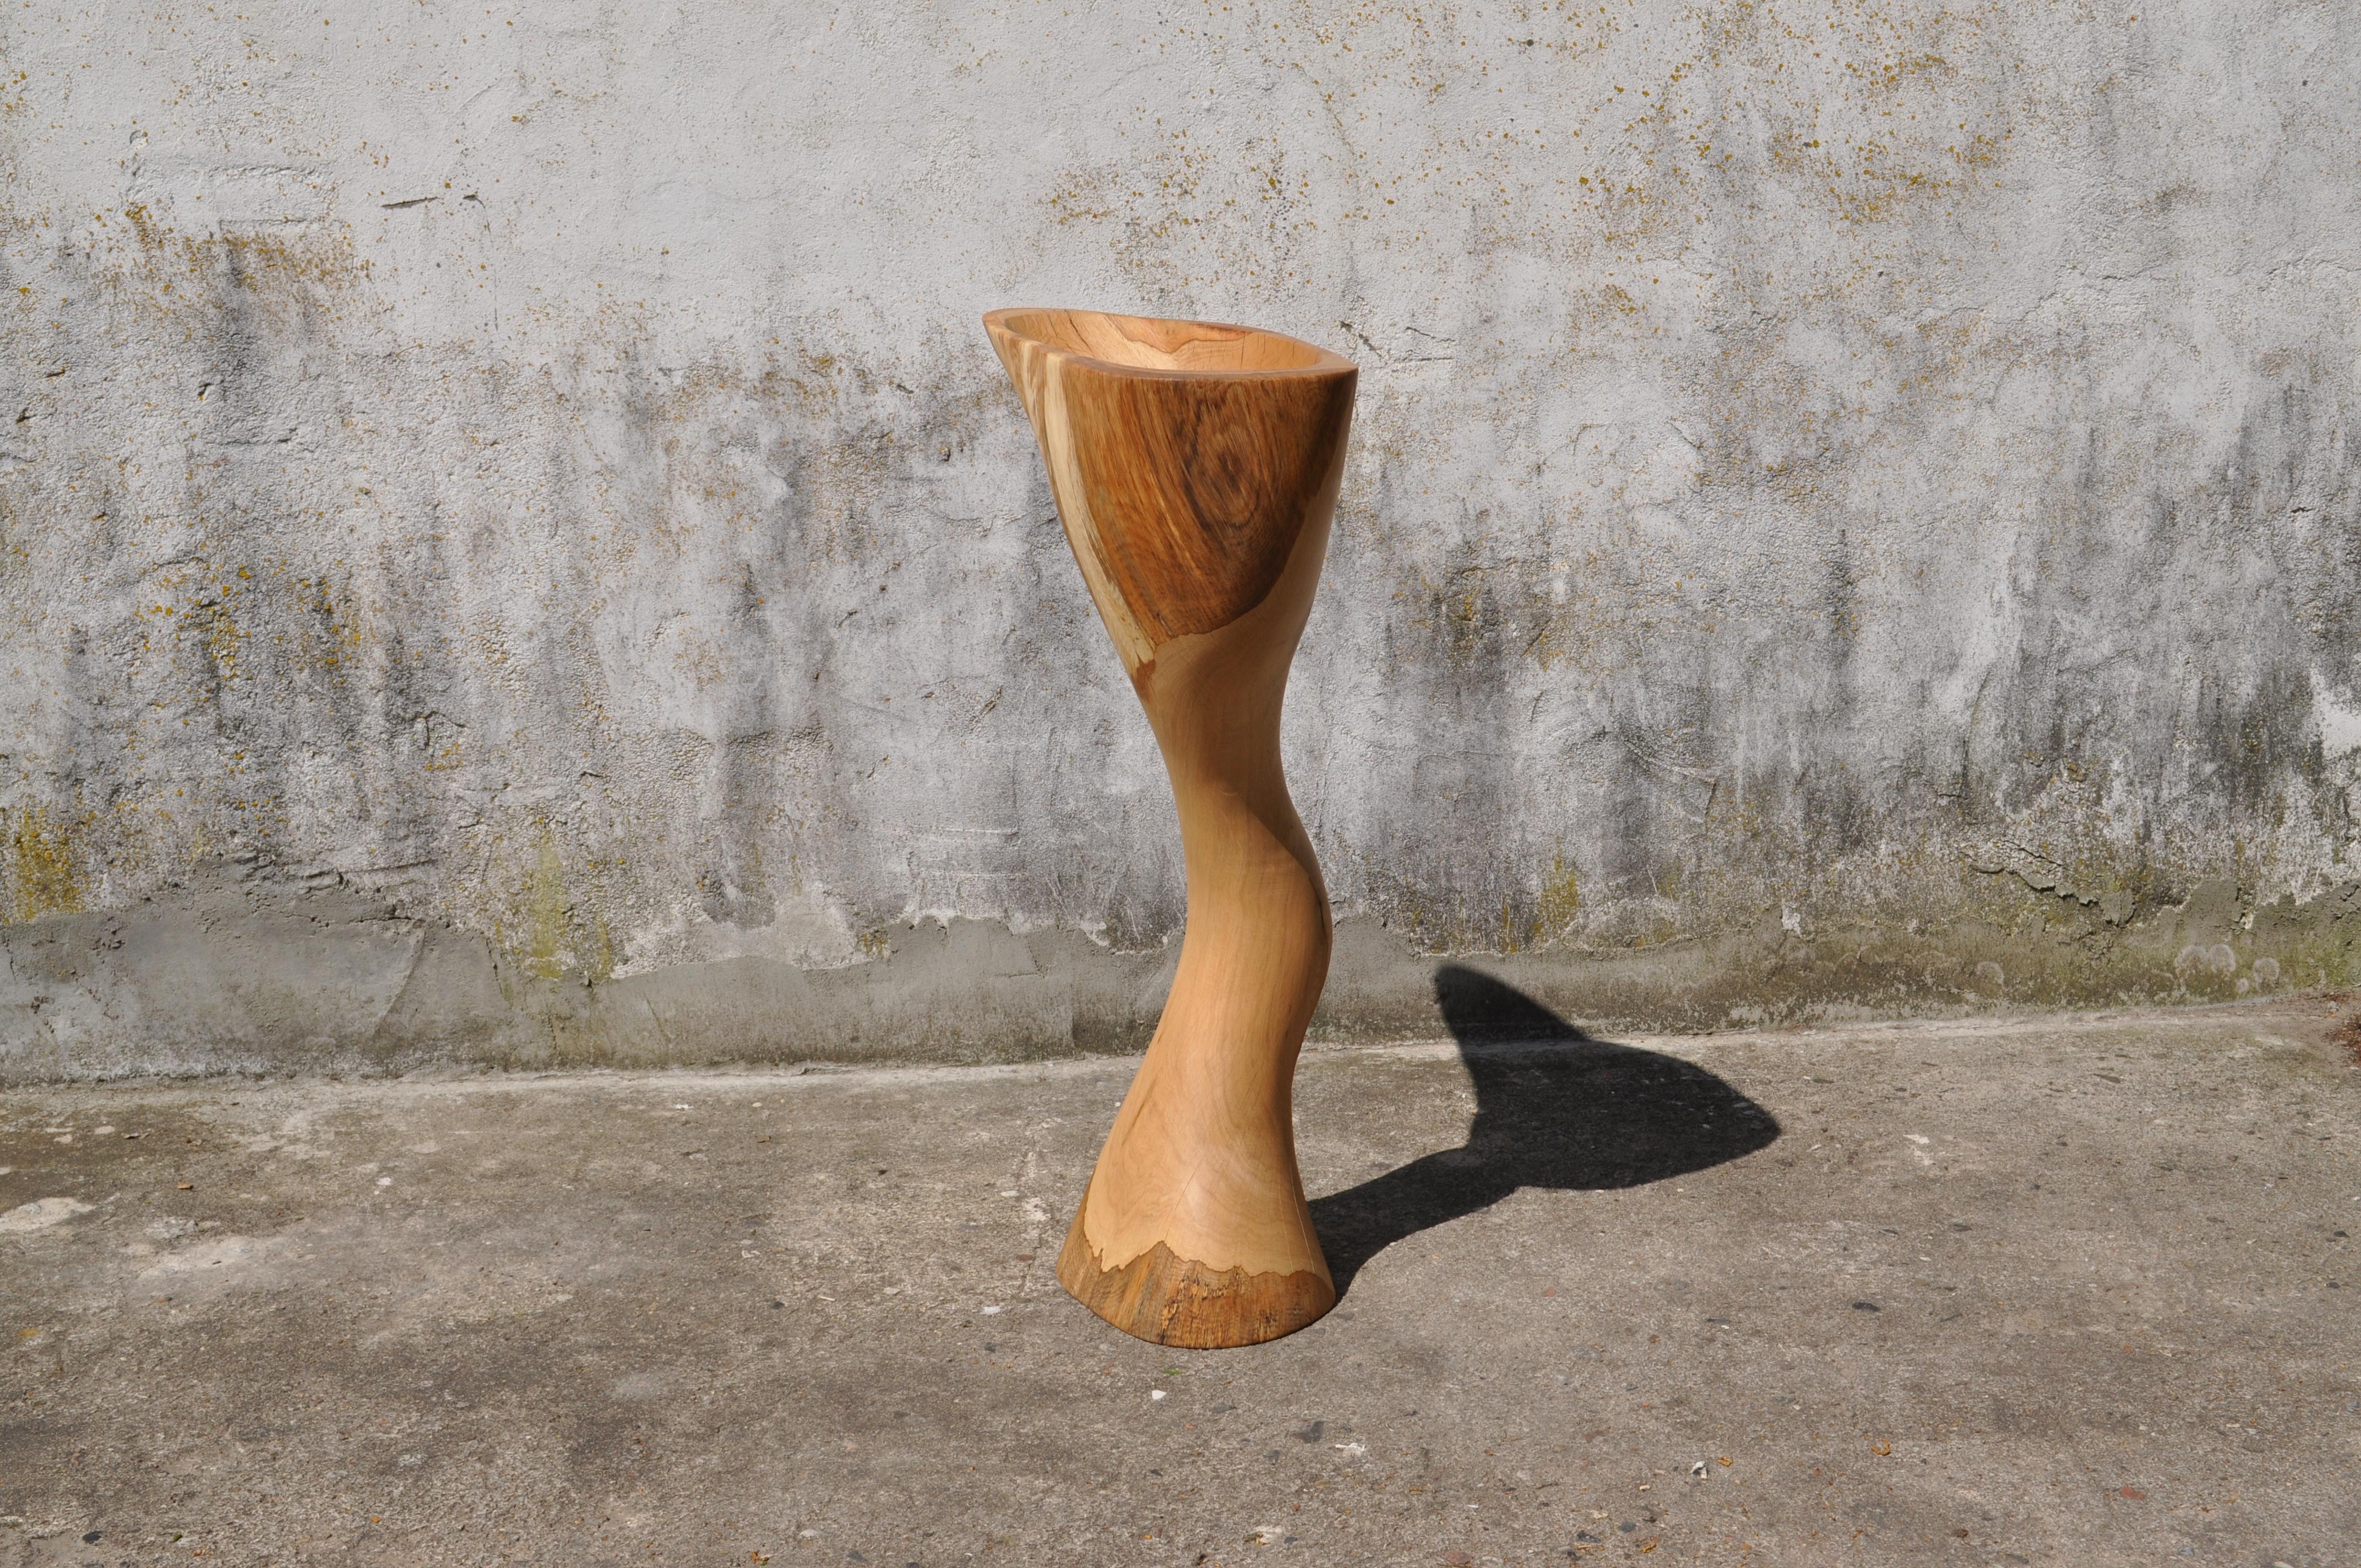 Oak vessel 1366 by Jörg Pietschmann
Dimensions: D 30 x W 61 x H 111 cm 
Materials: Oak. 
Finish: Polished oil finish.


Carved out of from a curved oak trunk.
In Pietschmann’s sculptures, trees that for centuries were part of a landscape and